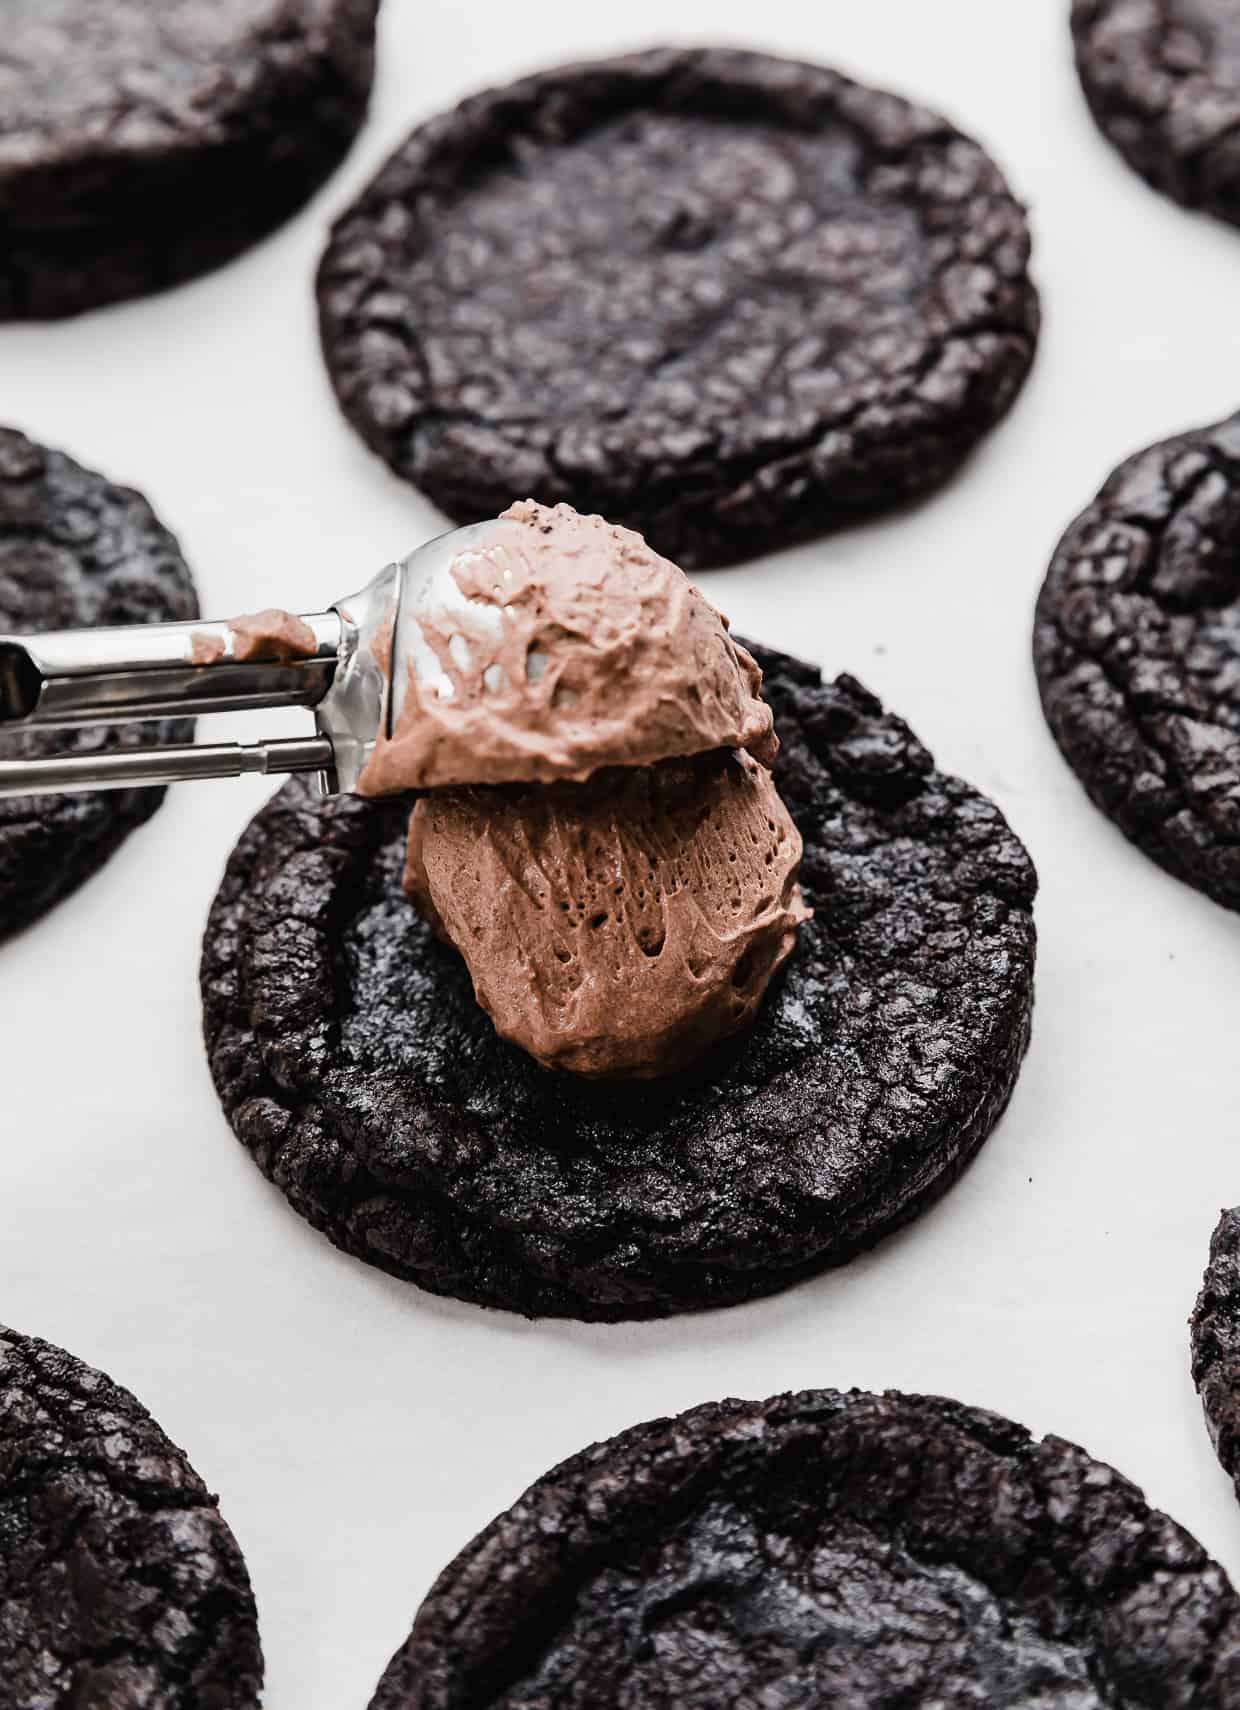 A cookie scoop putting chocolate mousse on top of a black cookie.